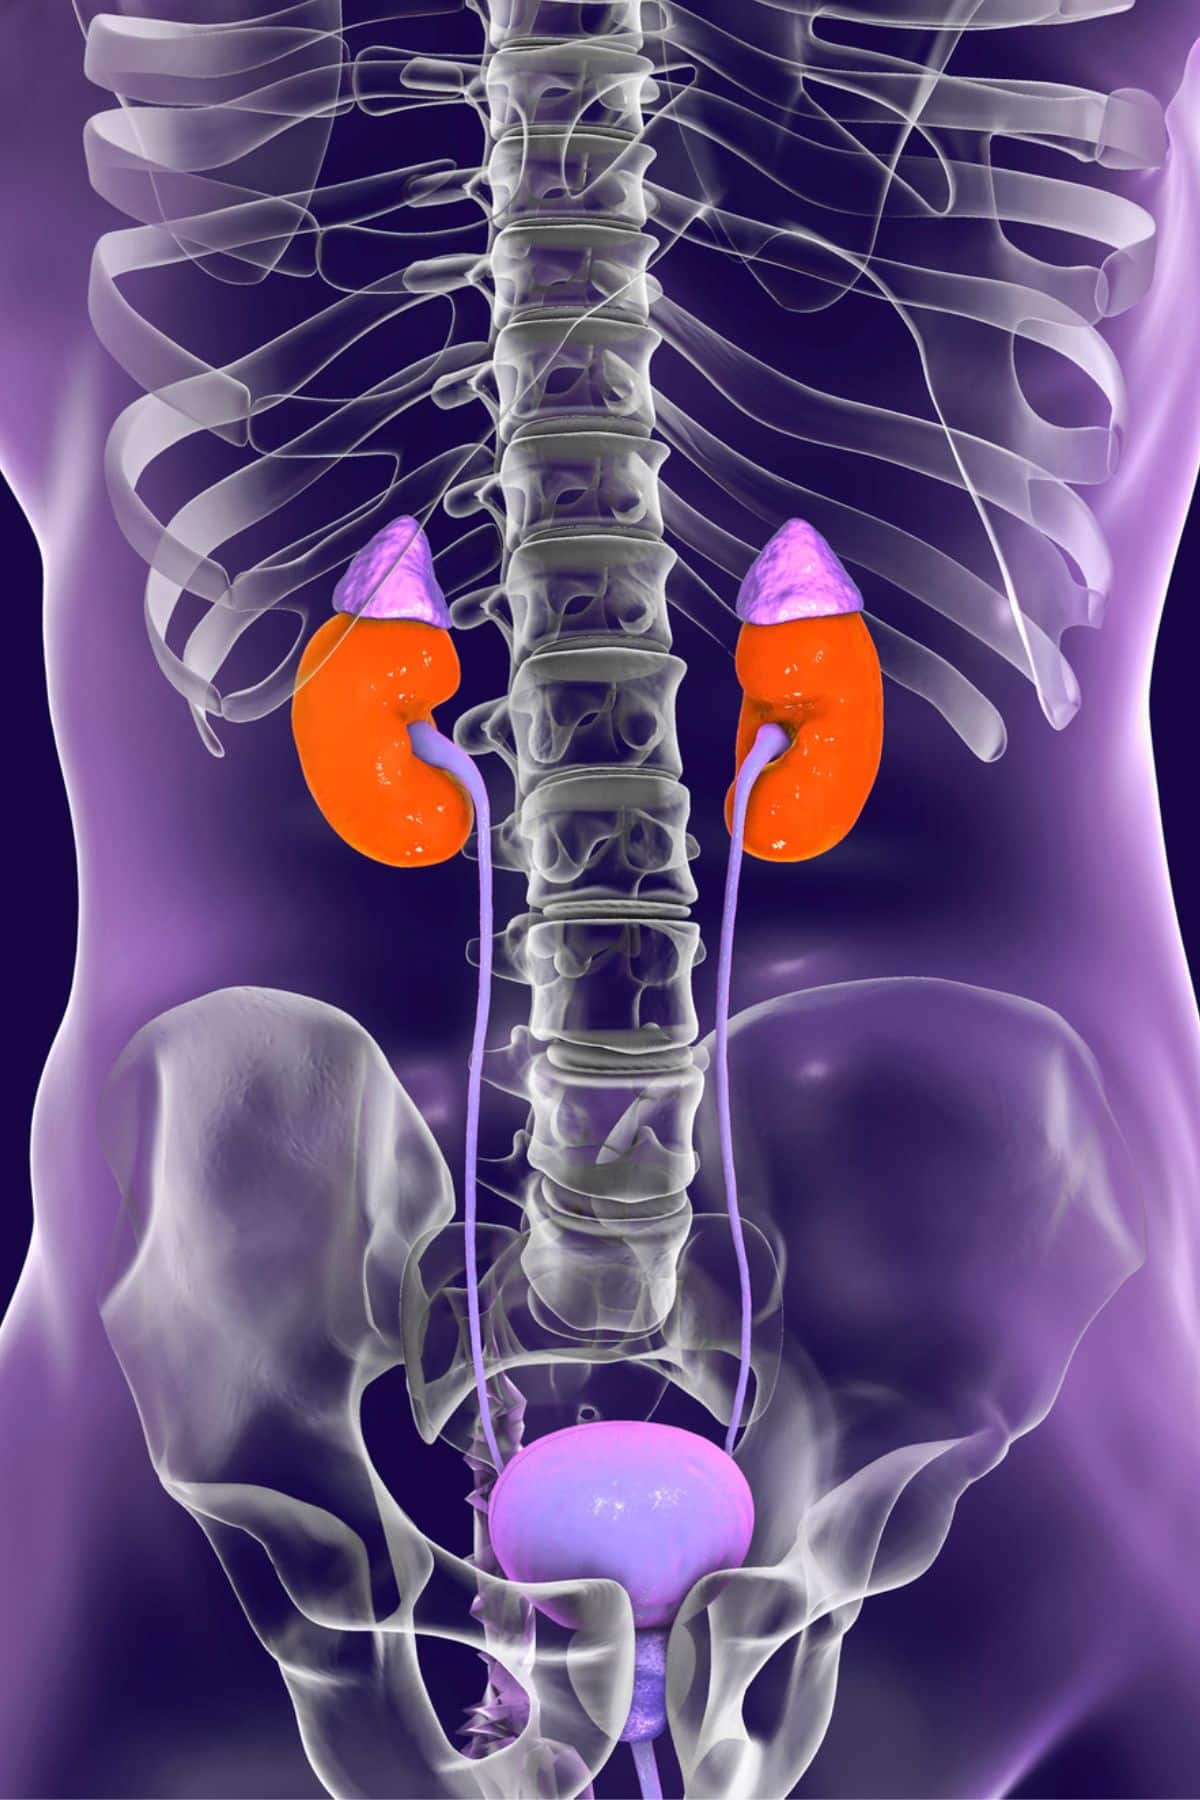 an image depicting kidneys in the human body.